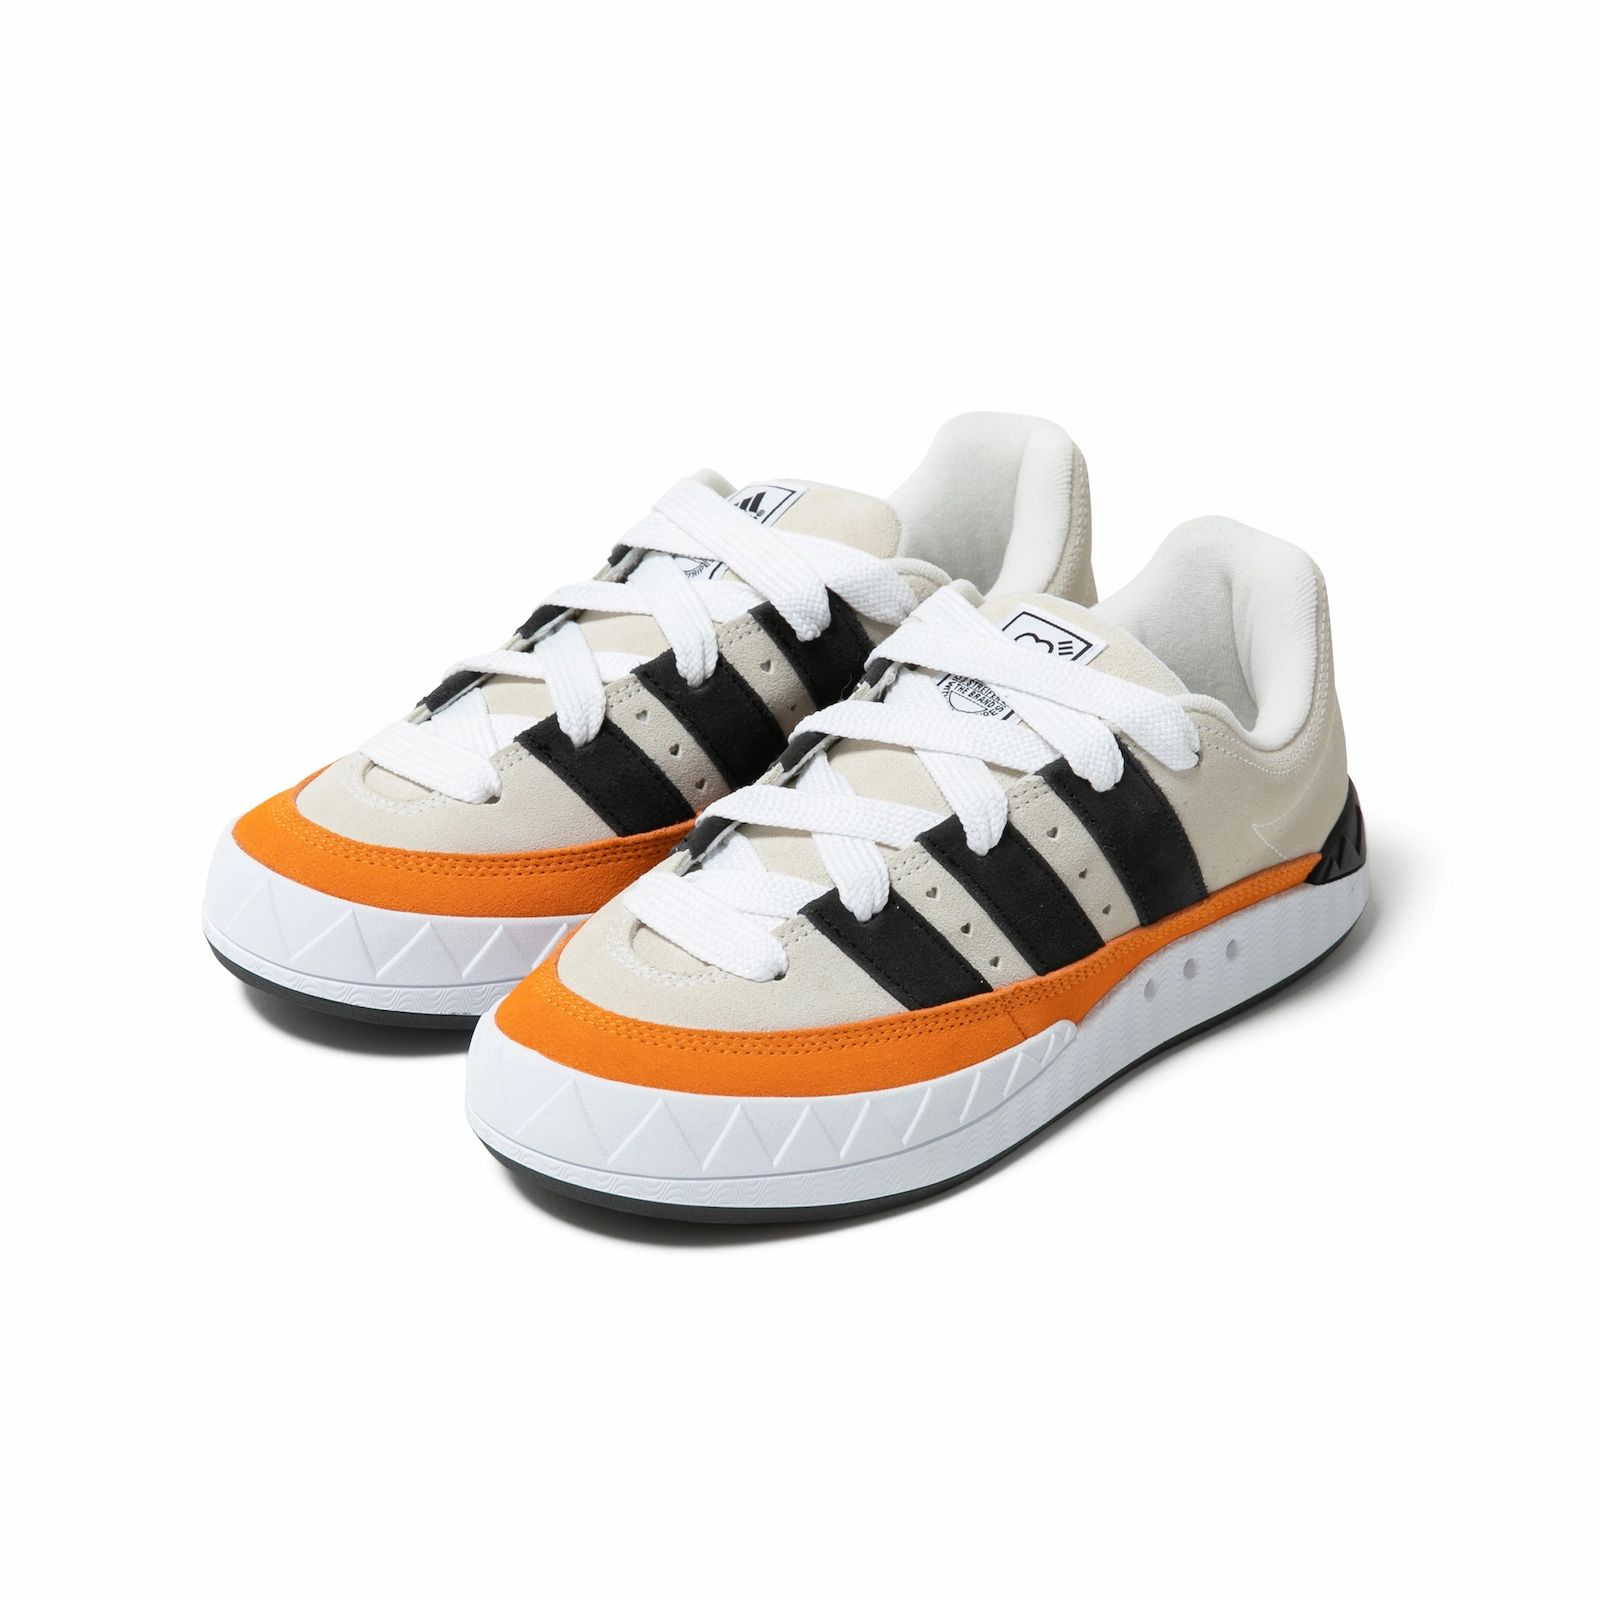 adidas Originals by HUMAN MADE “ADIMATIC HM” Exclusive Release | HUMAN MADE  Inc.